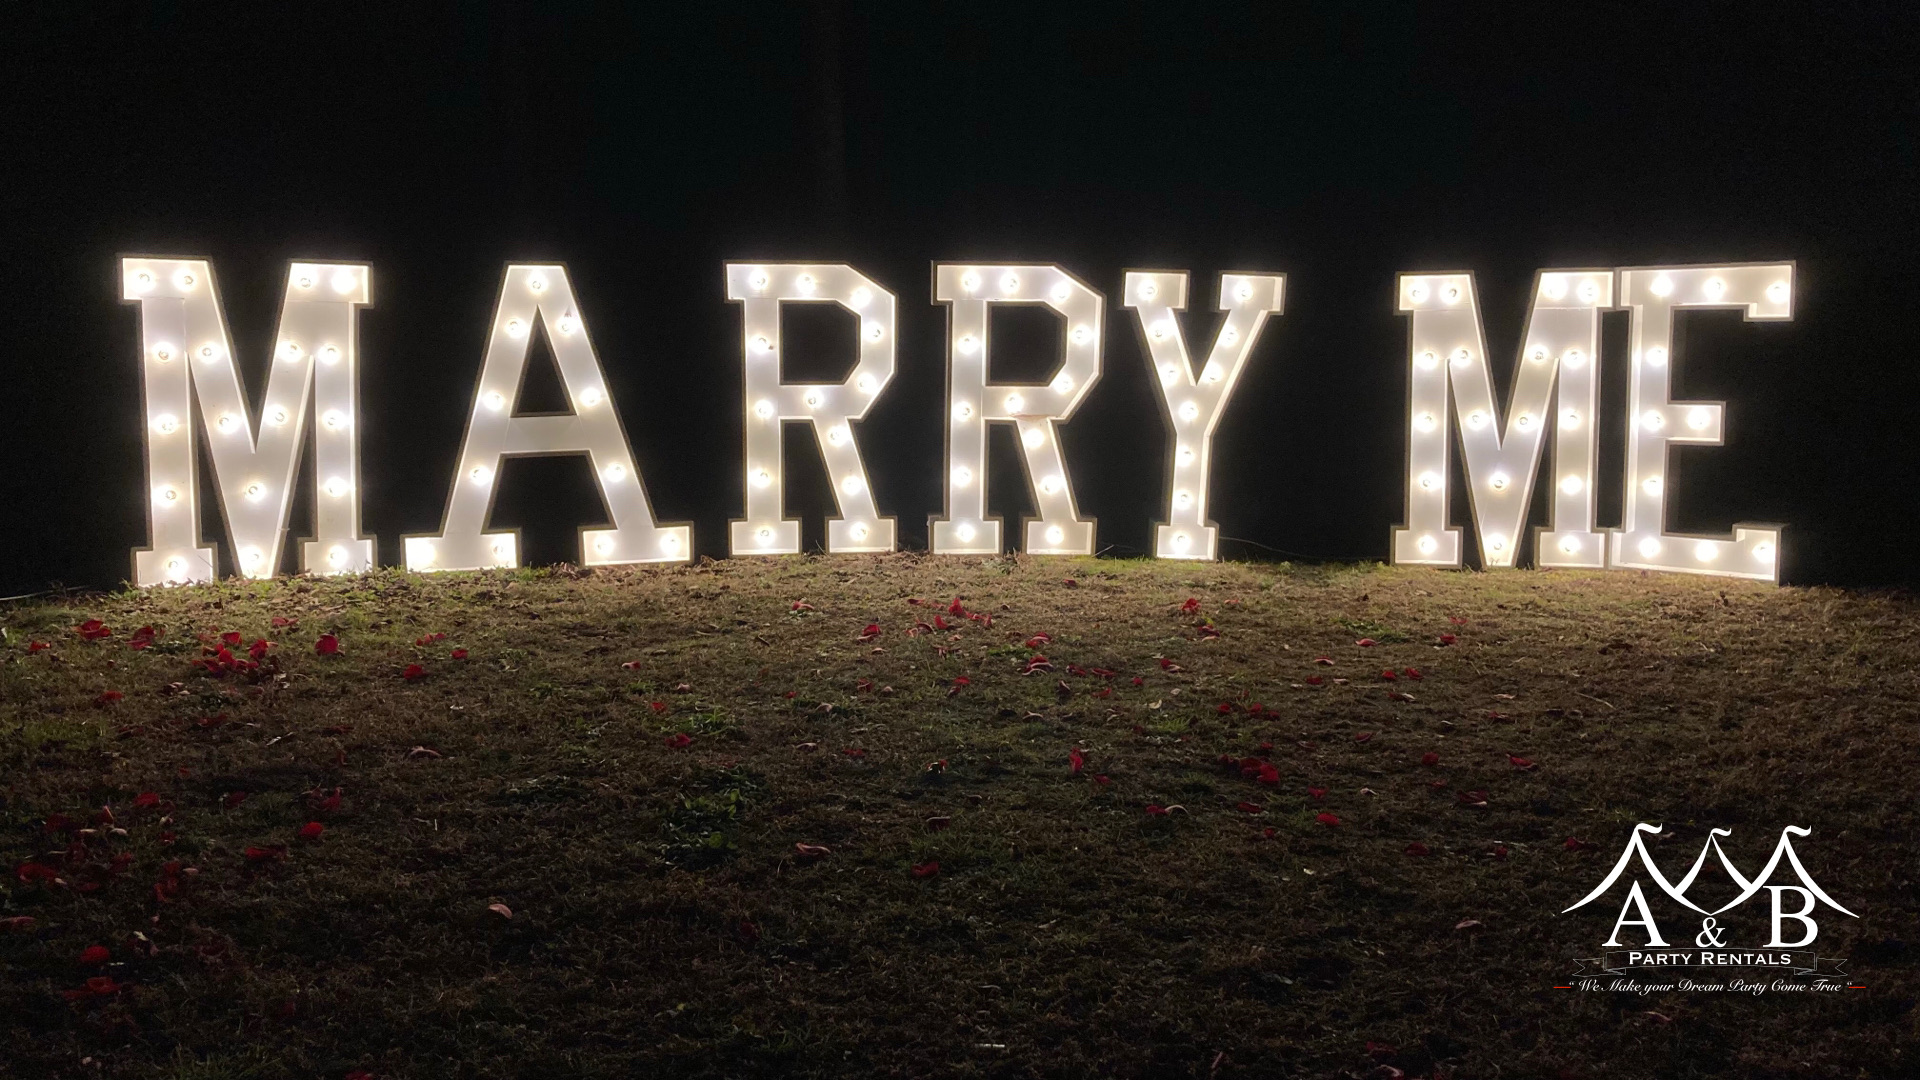 Marquee letter rentals available for events. The image showcases a selection of illuminated marquee letters for rent, perfect for adding a touch of elegance and style to various occasions. These eye-catching marquee letters are offered for rent by A&B Party Rentals in Salisbury, MD.